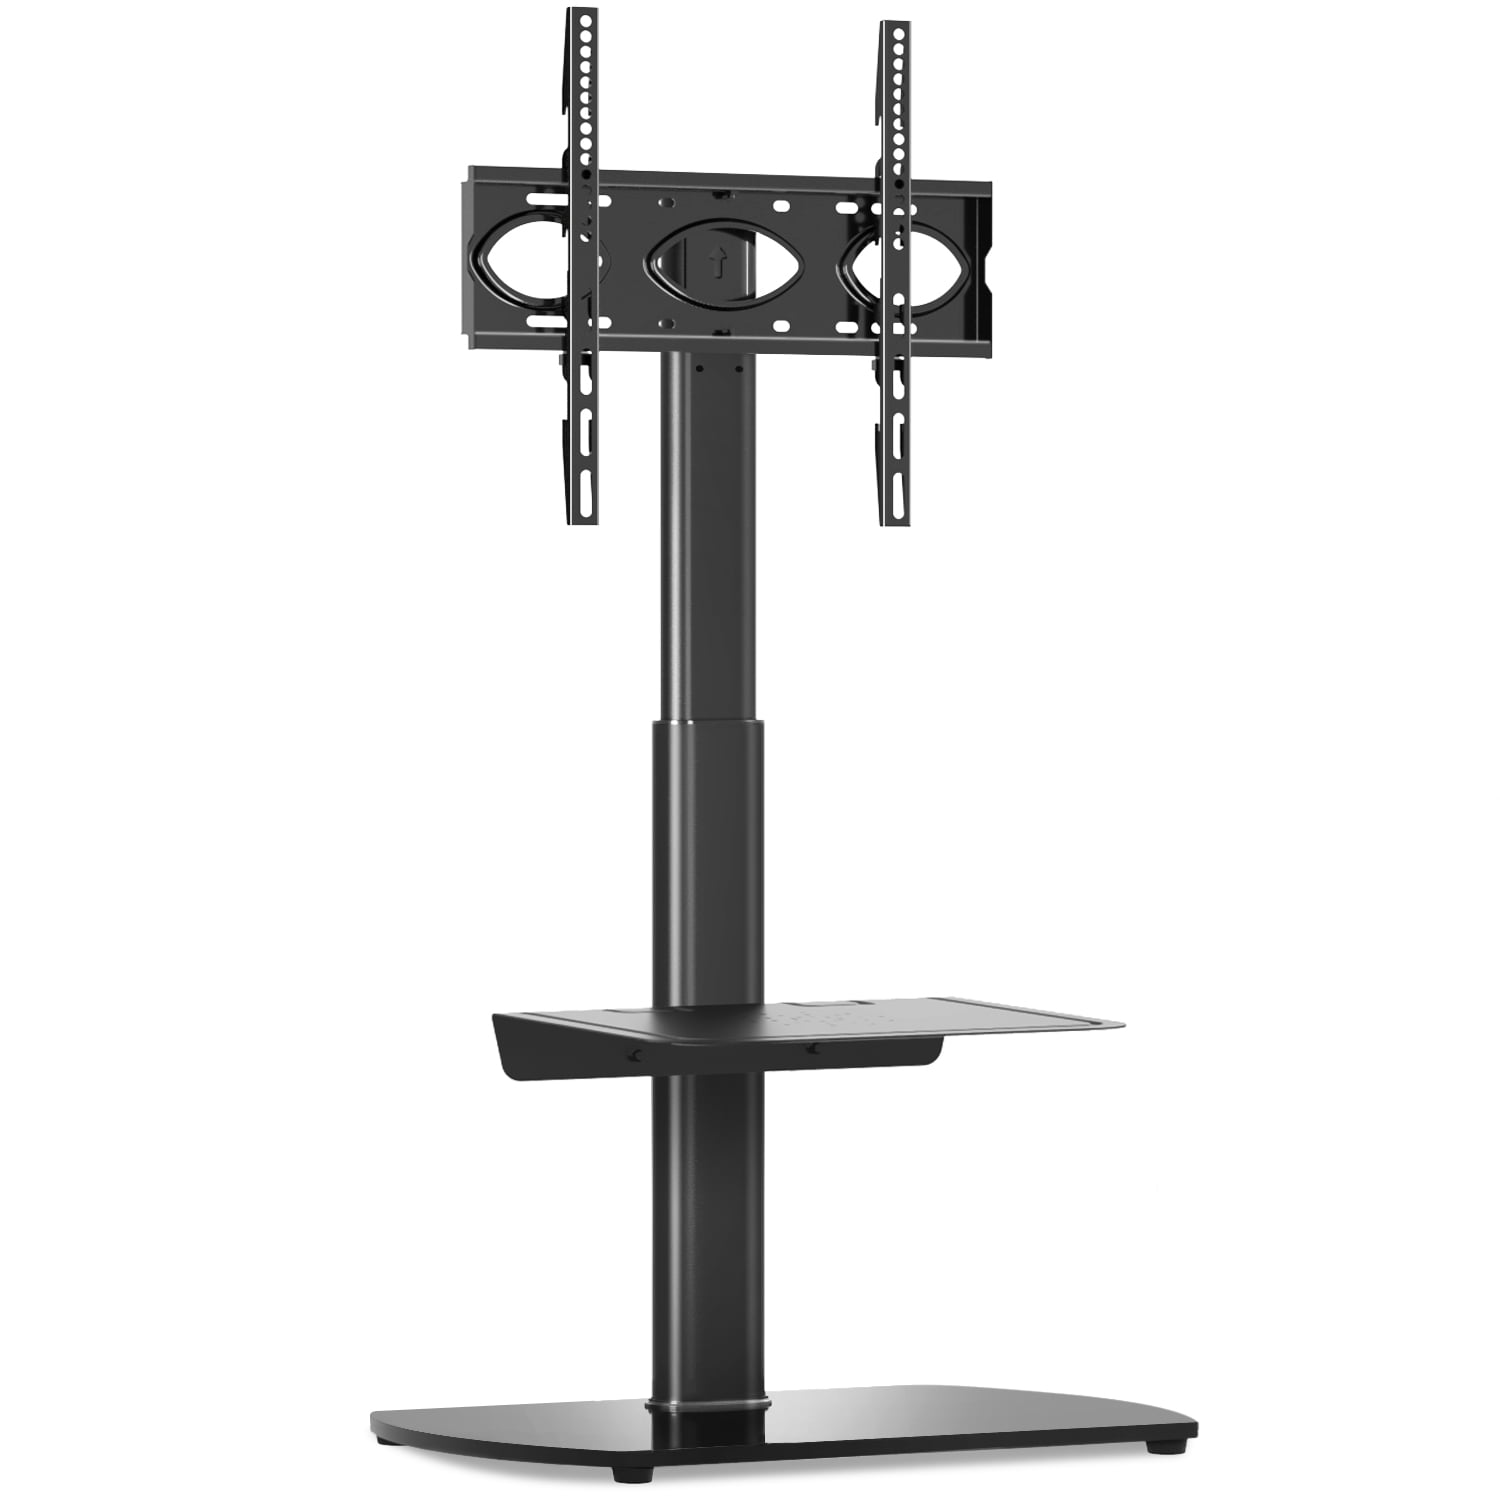 Rfiver Modern Swivel Floor TV Stand for TVs up to 55", 2 ...